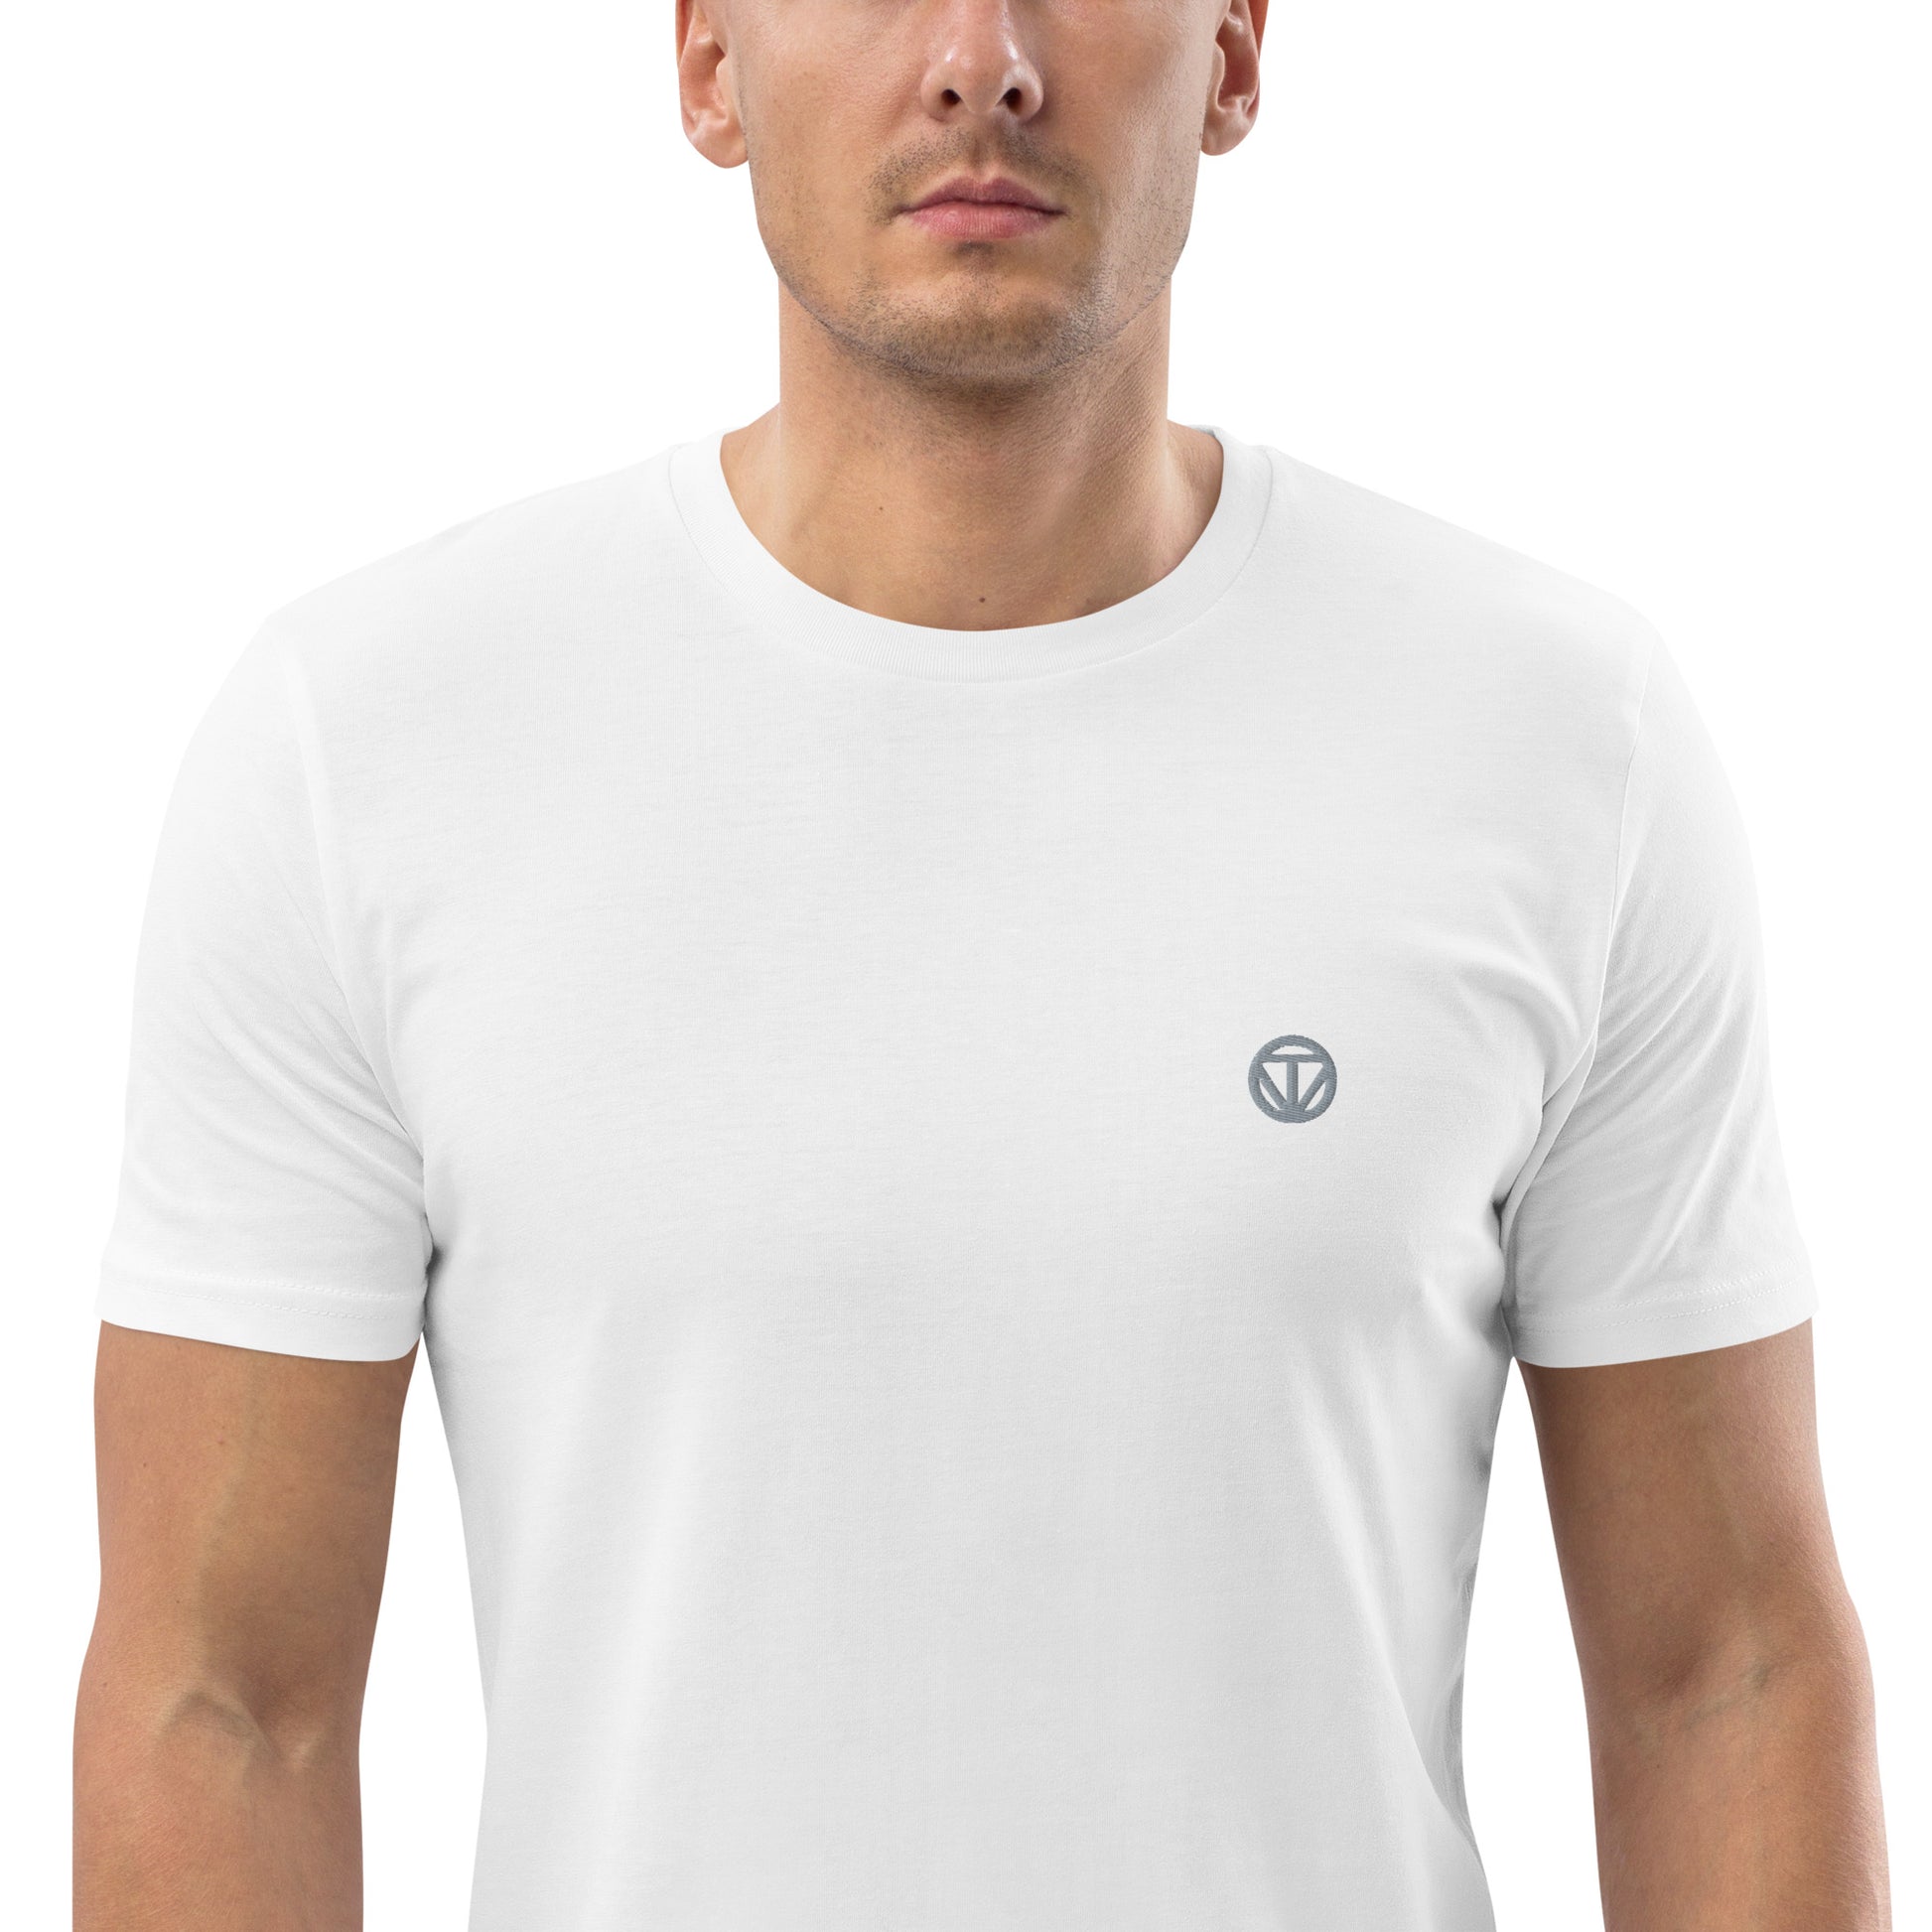 TIME OF VIBES - Organic Cotton T-Shirt (White/Grey) - €33.50